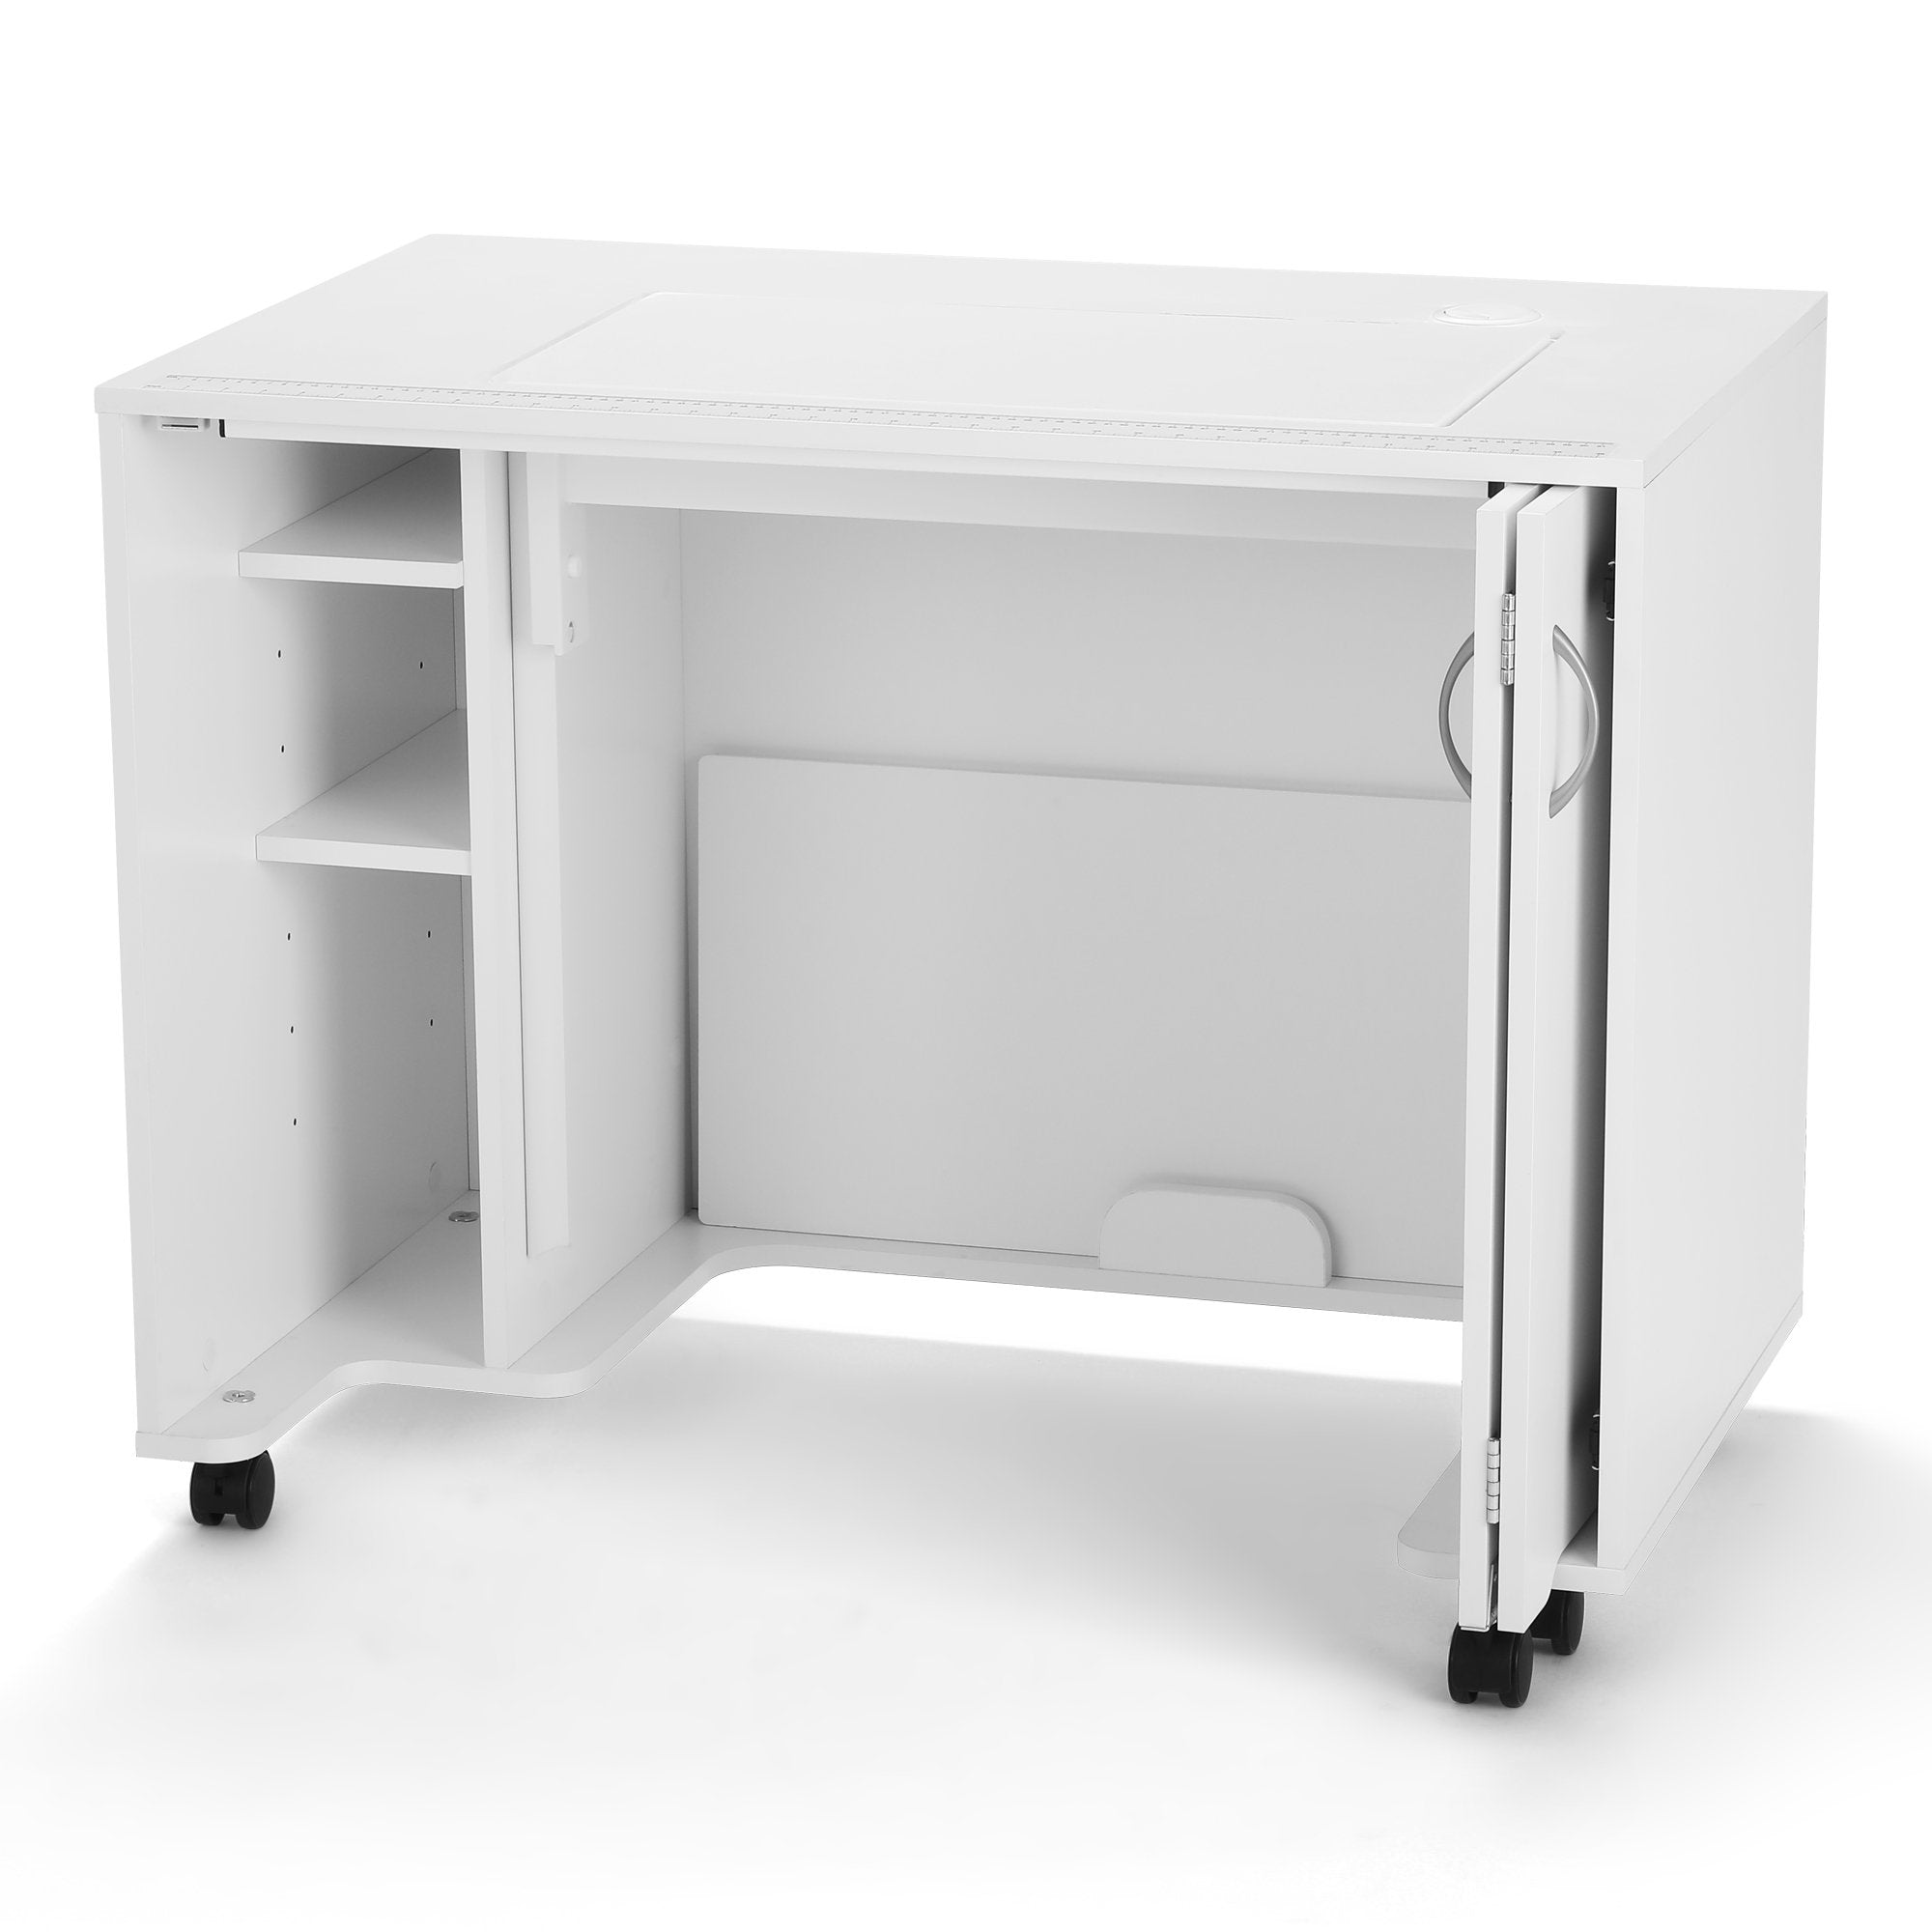 Kangaroo Mod Sewing Cabinet – She Sewing Tables